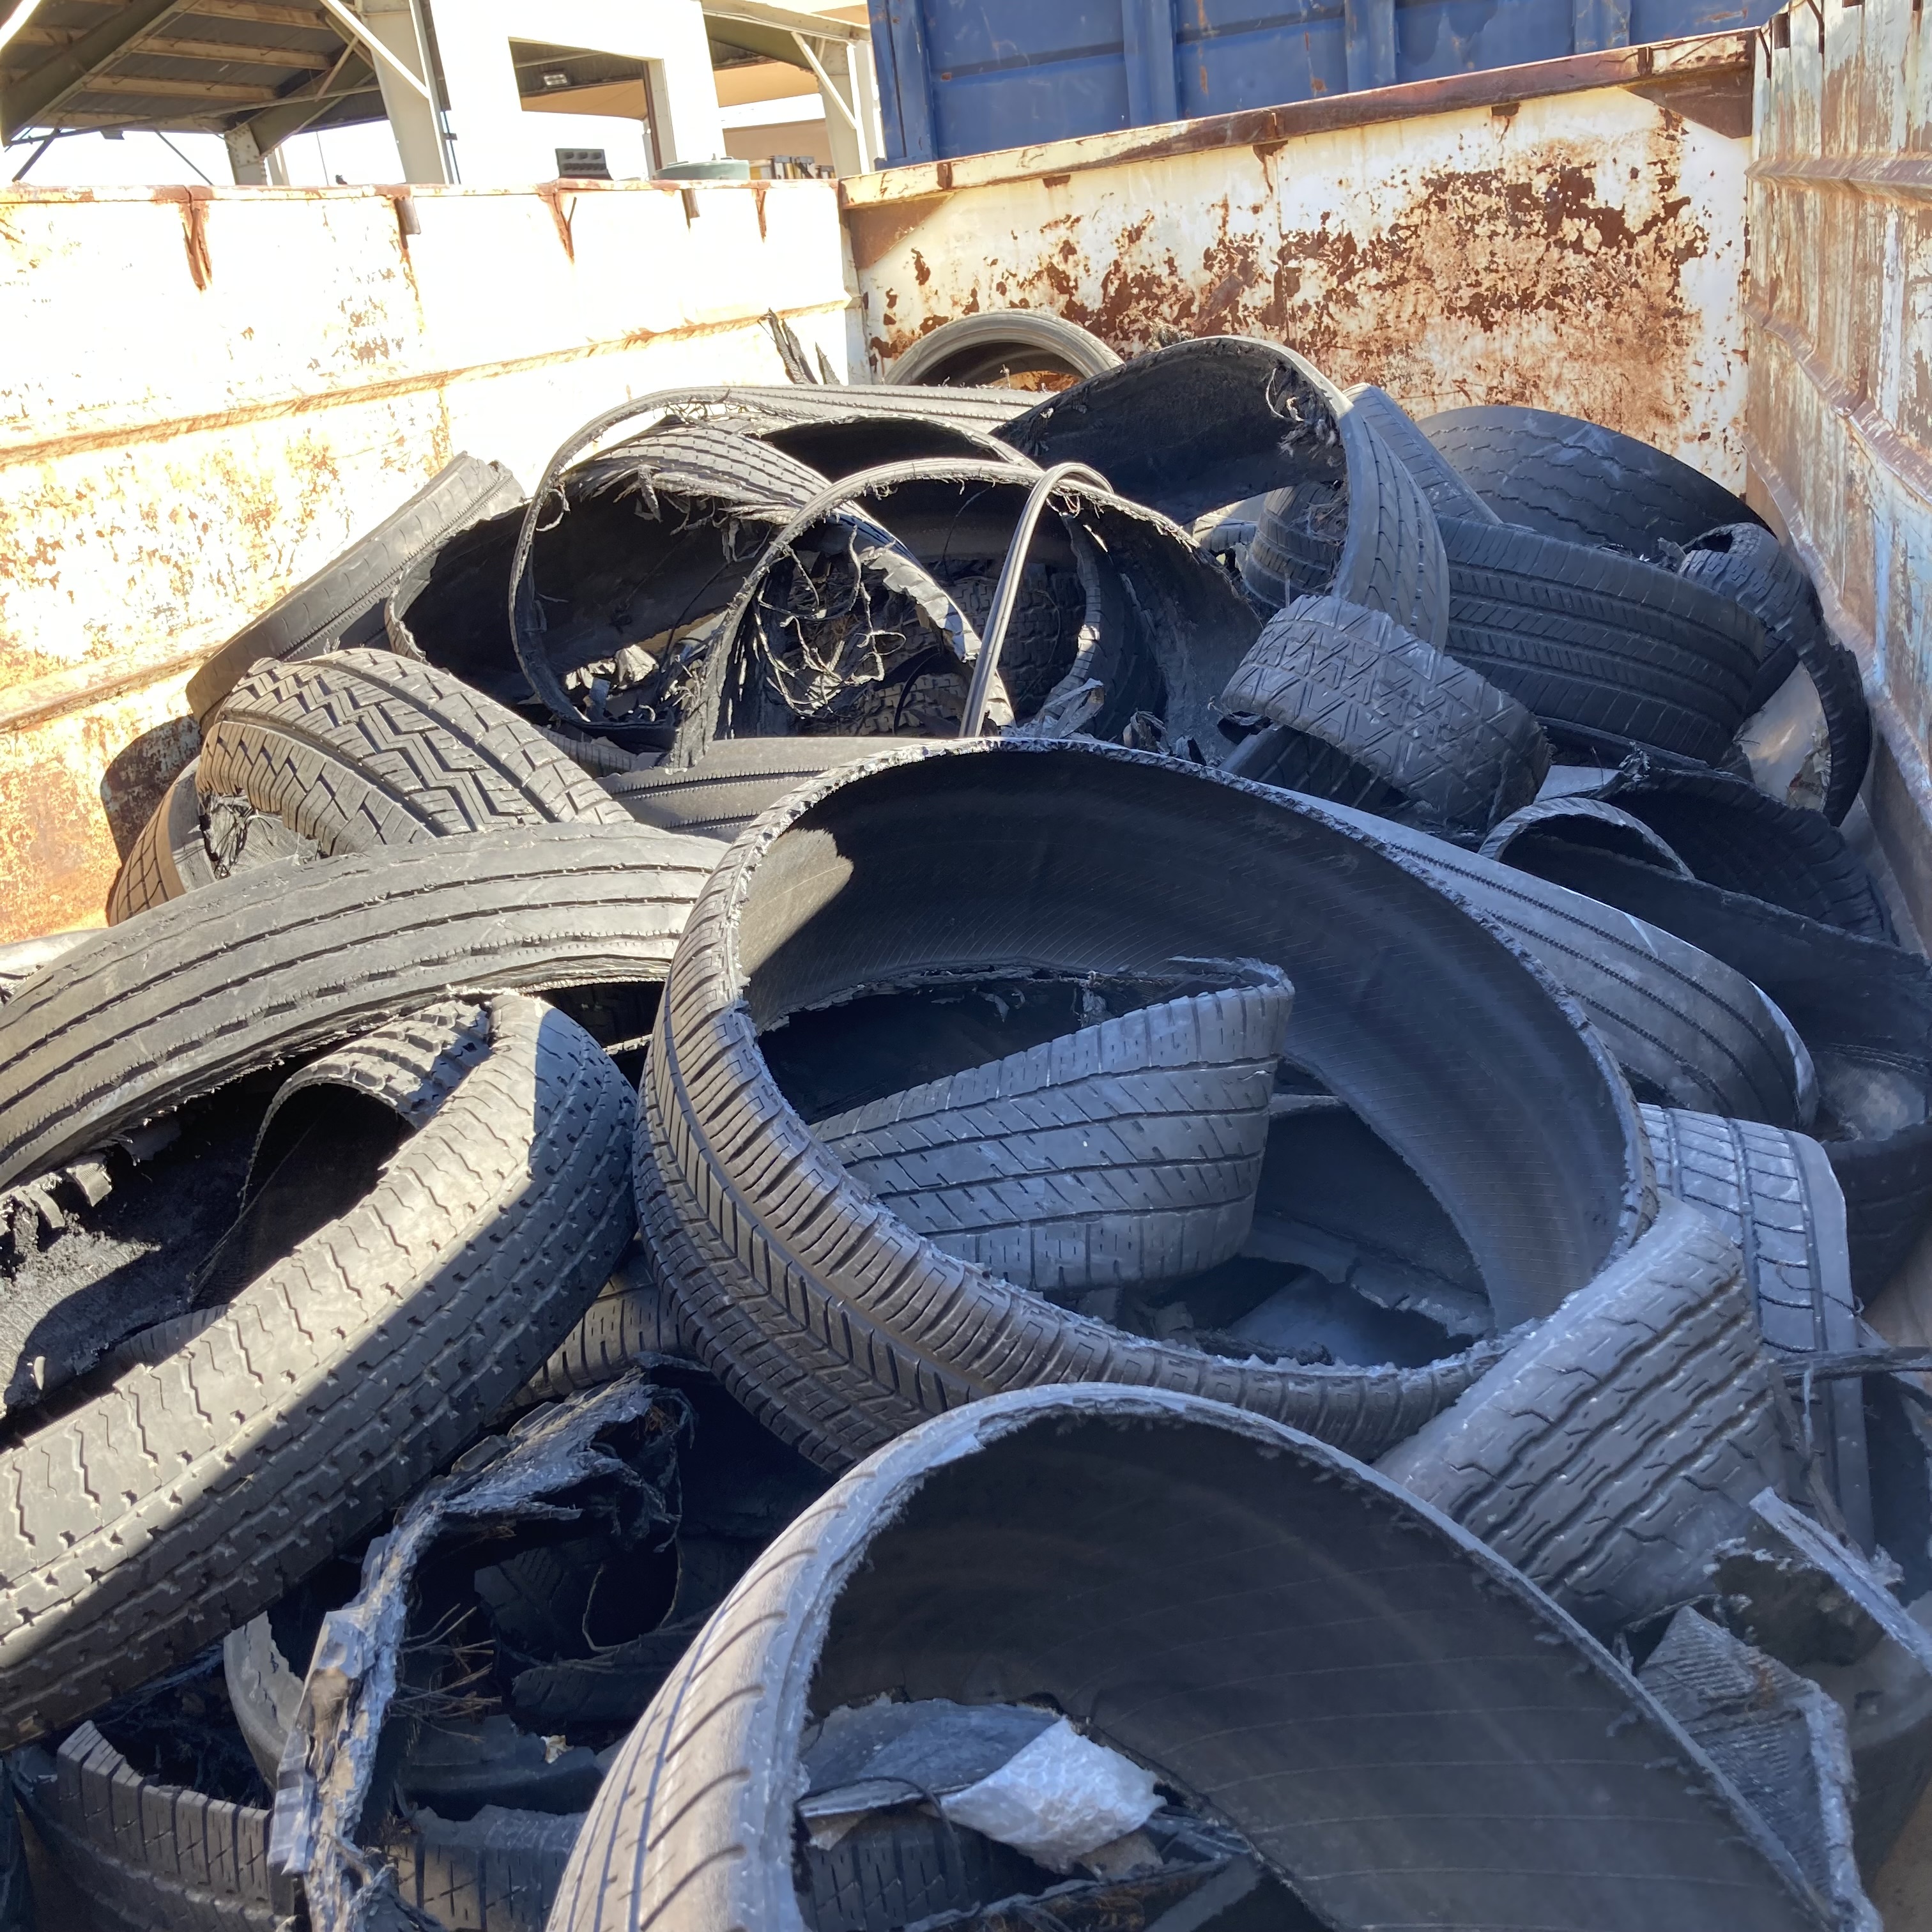 A dumpster is filled with shredded and blown-out tires.